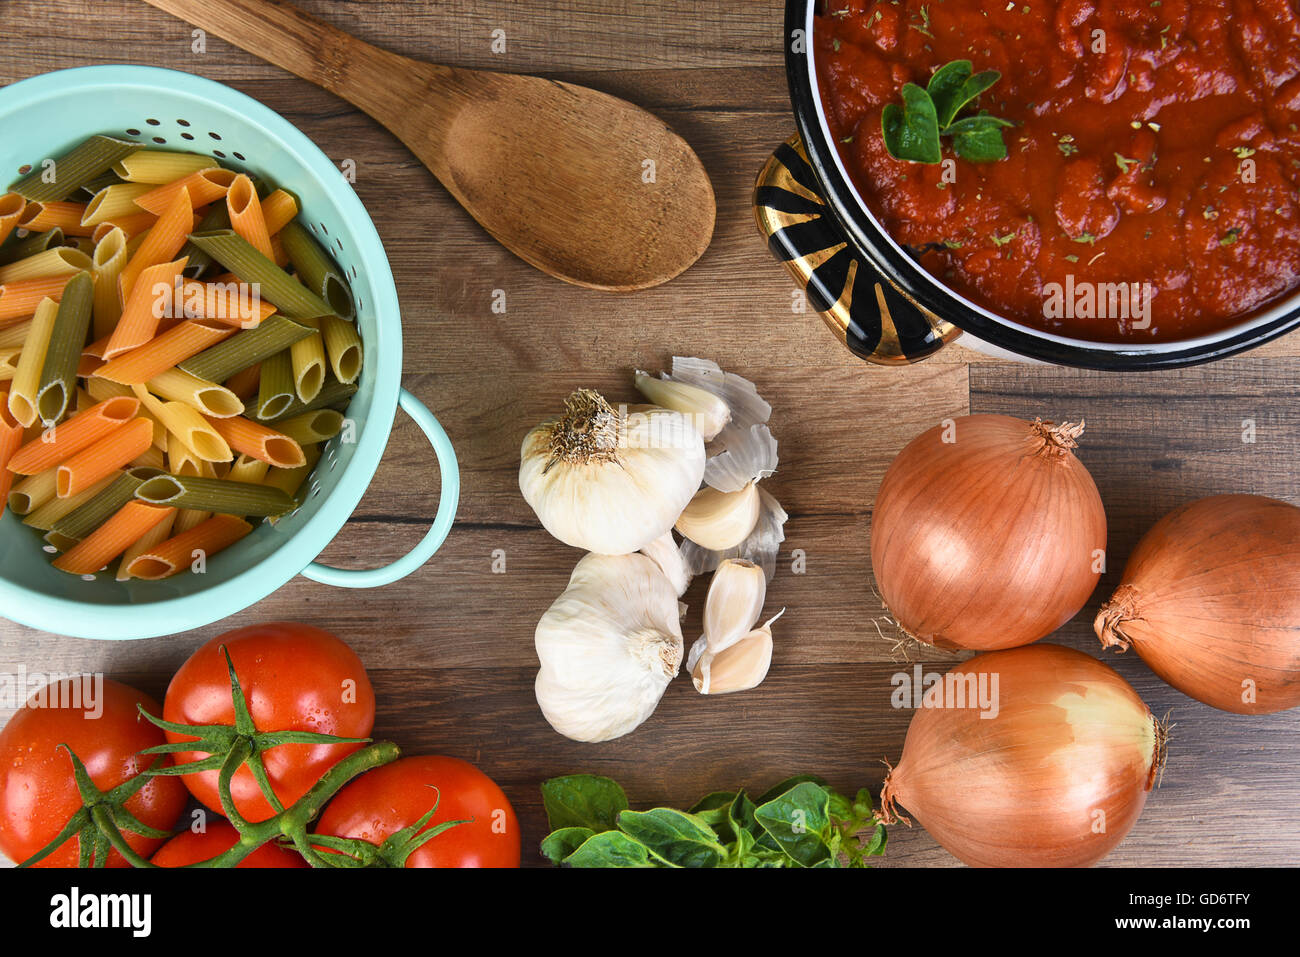 Italian meal ingredients on a wood kitchen table. A pot of sauce, colander of rigatoni, tomatoes, garlic, oregano, and onions Stock Photo